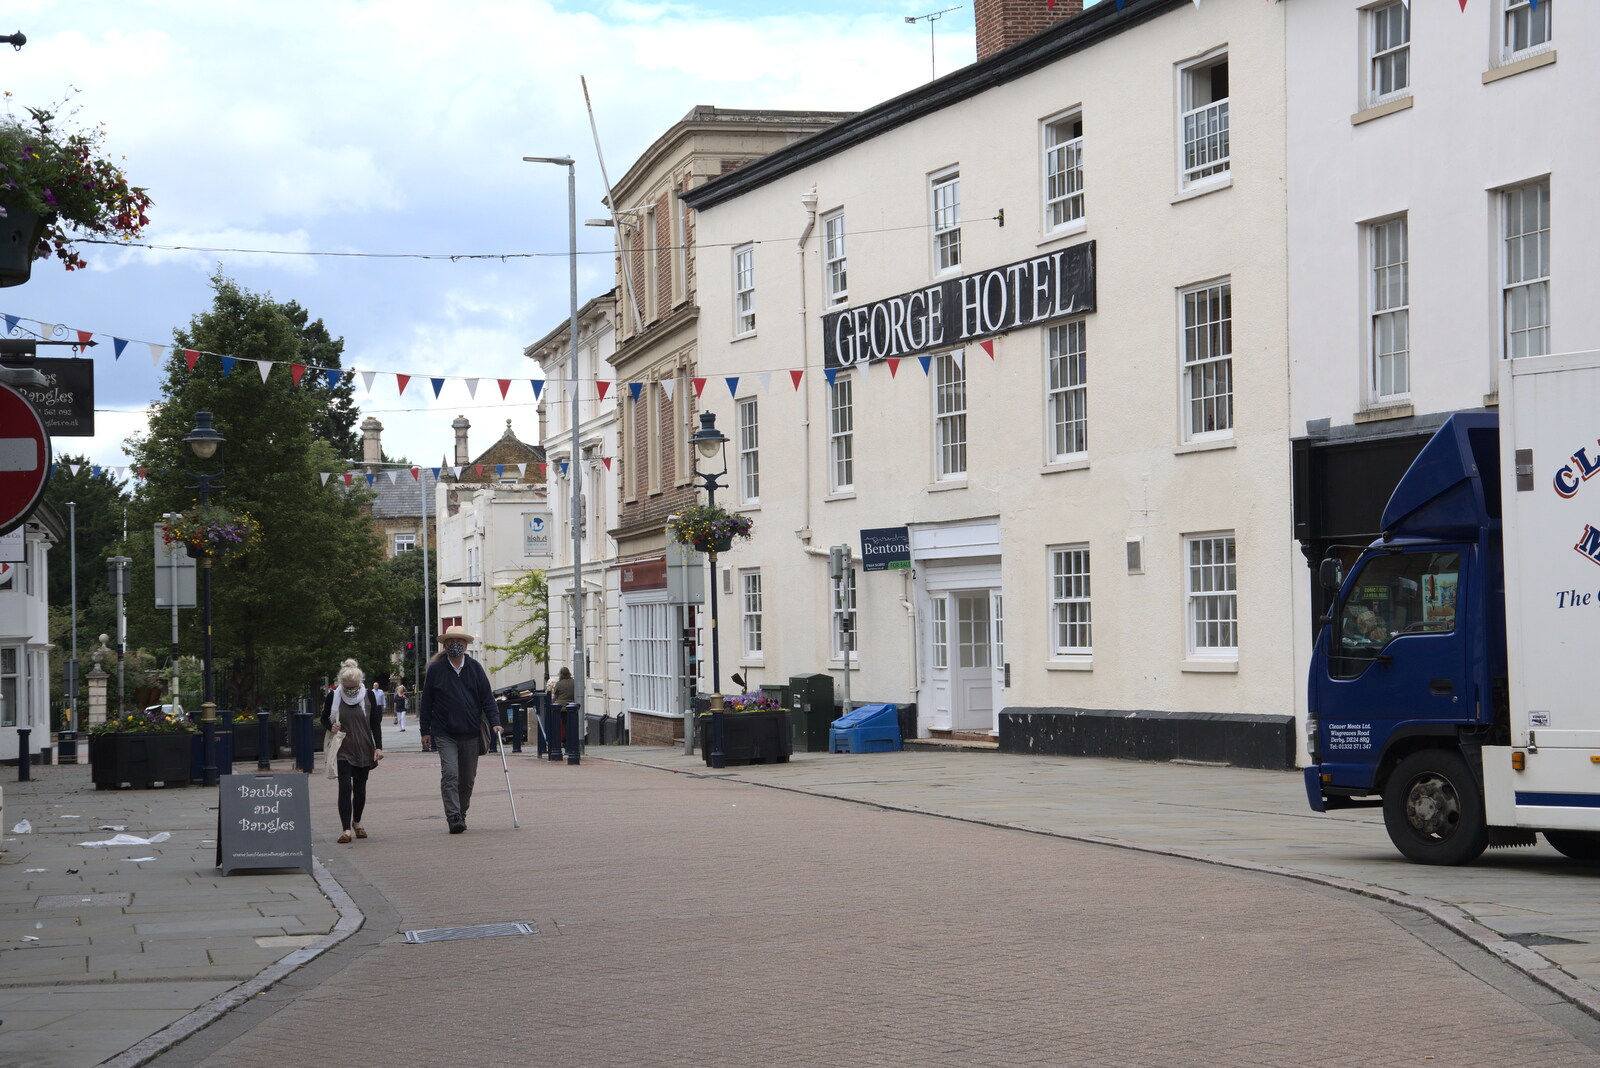 The George Hotel on High Street from Pork Pies and Dockside Dereliction, Melton Mowbray and Liverpool - 7th August 2021